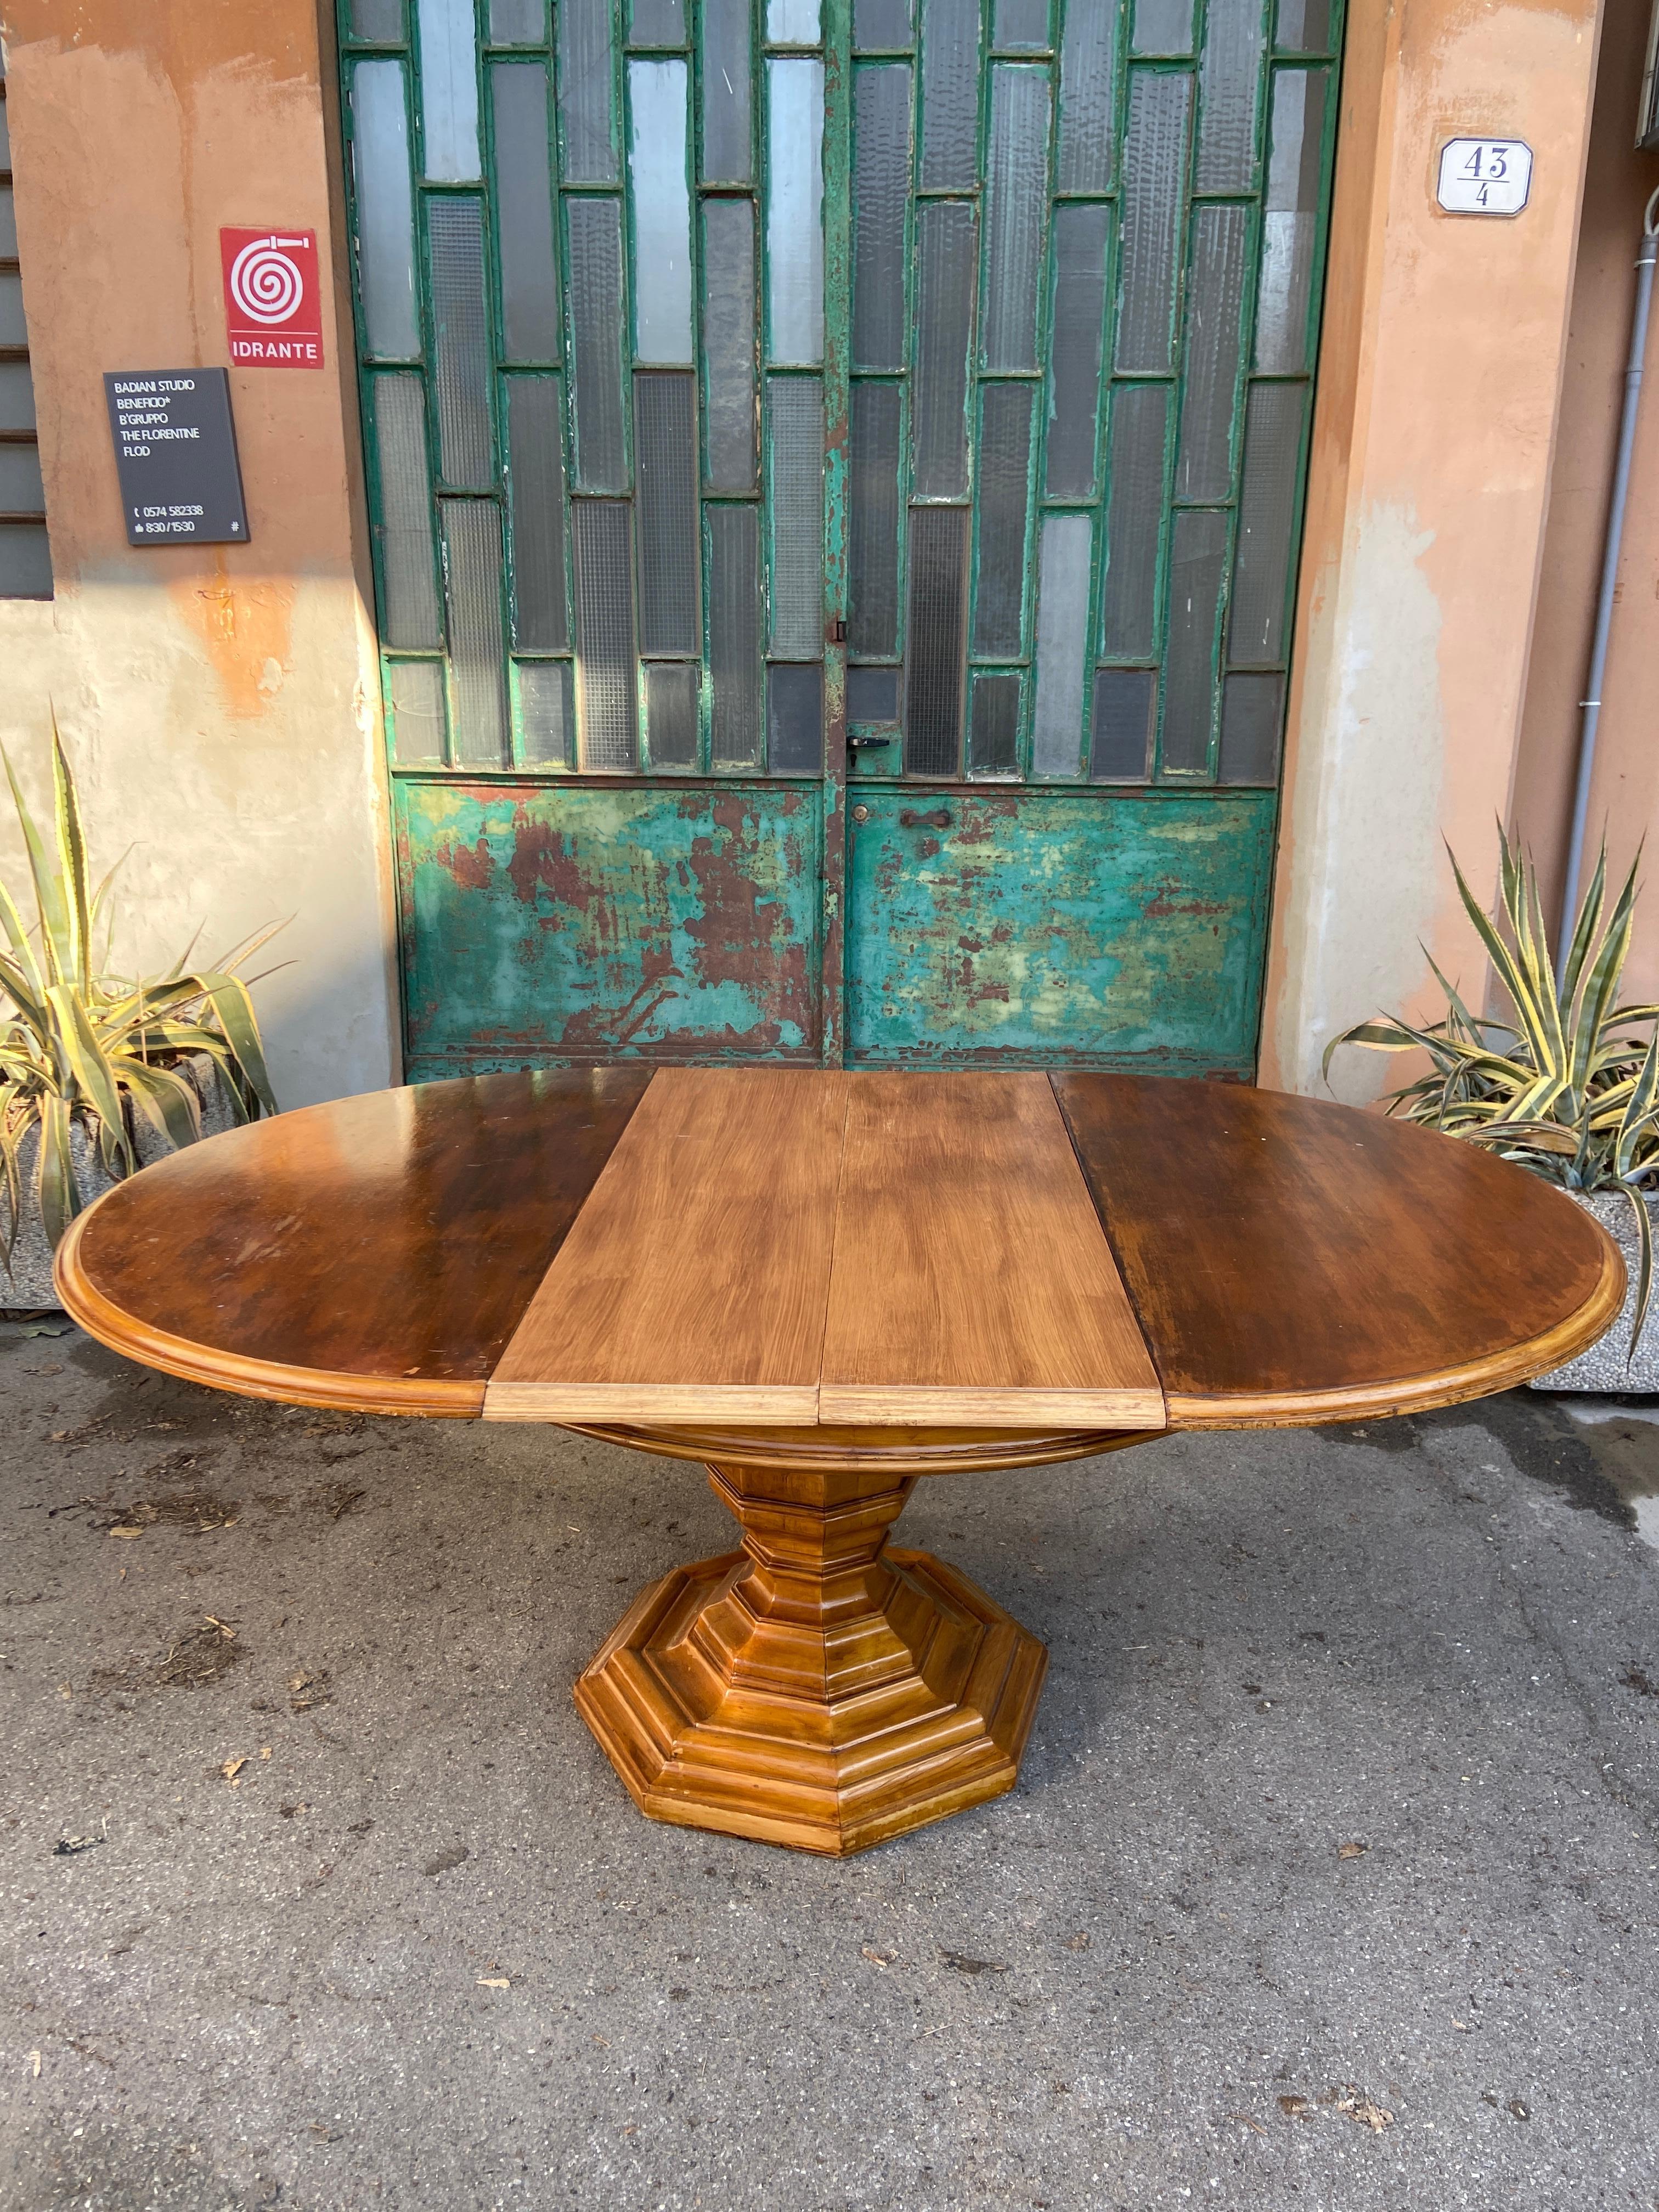 19th Century Italian Octagonal Adjustable Table with Shaped Wooden Leg For Sale 5